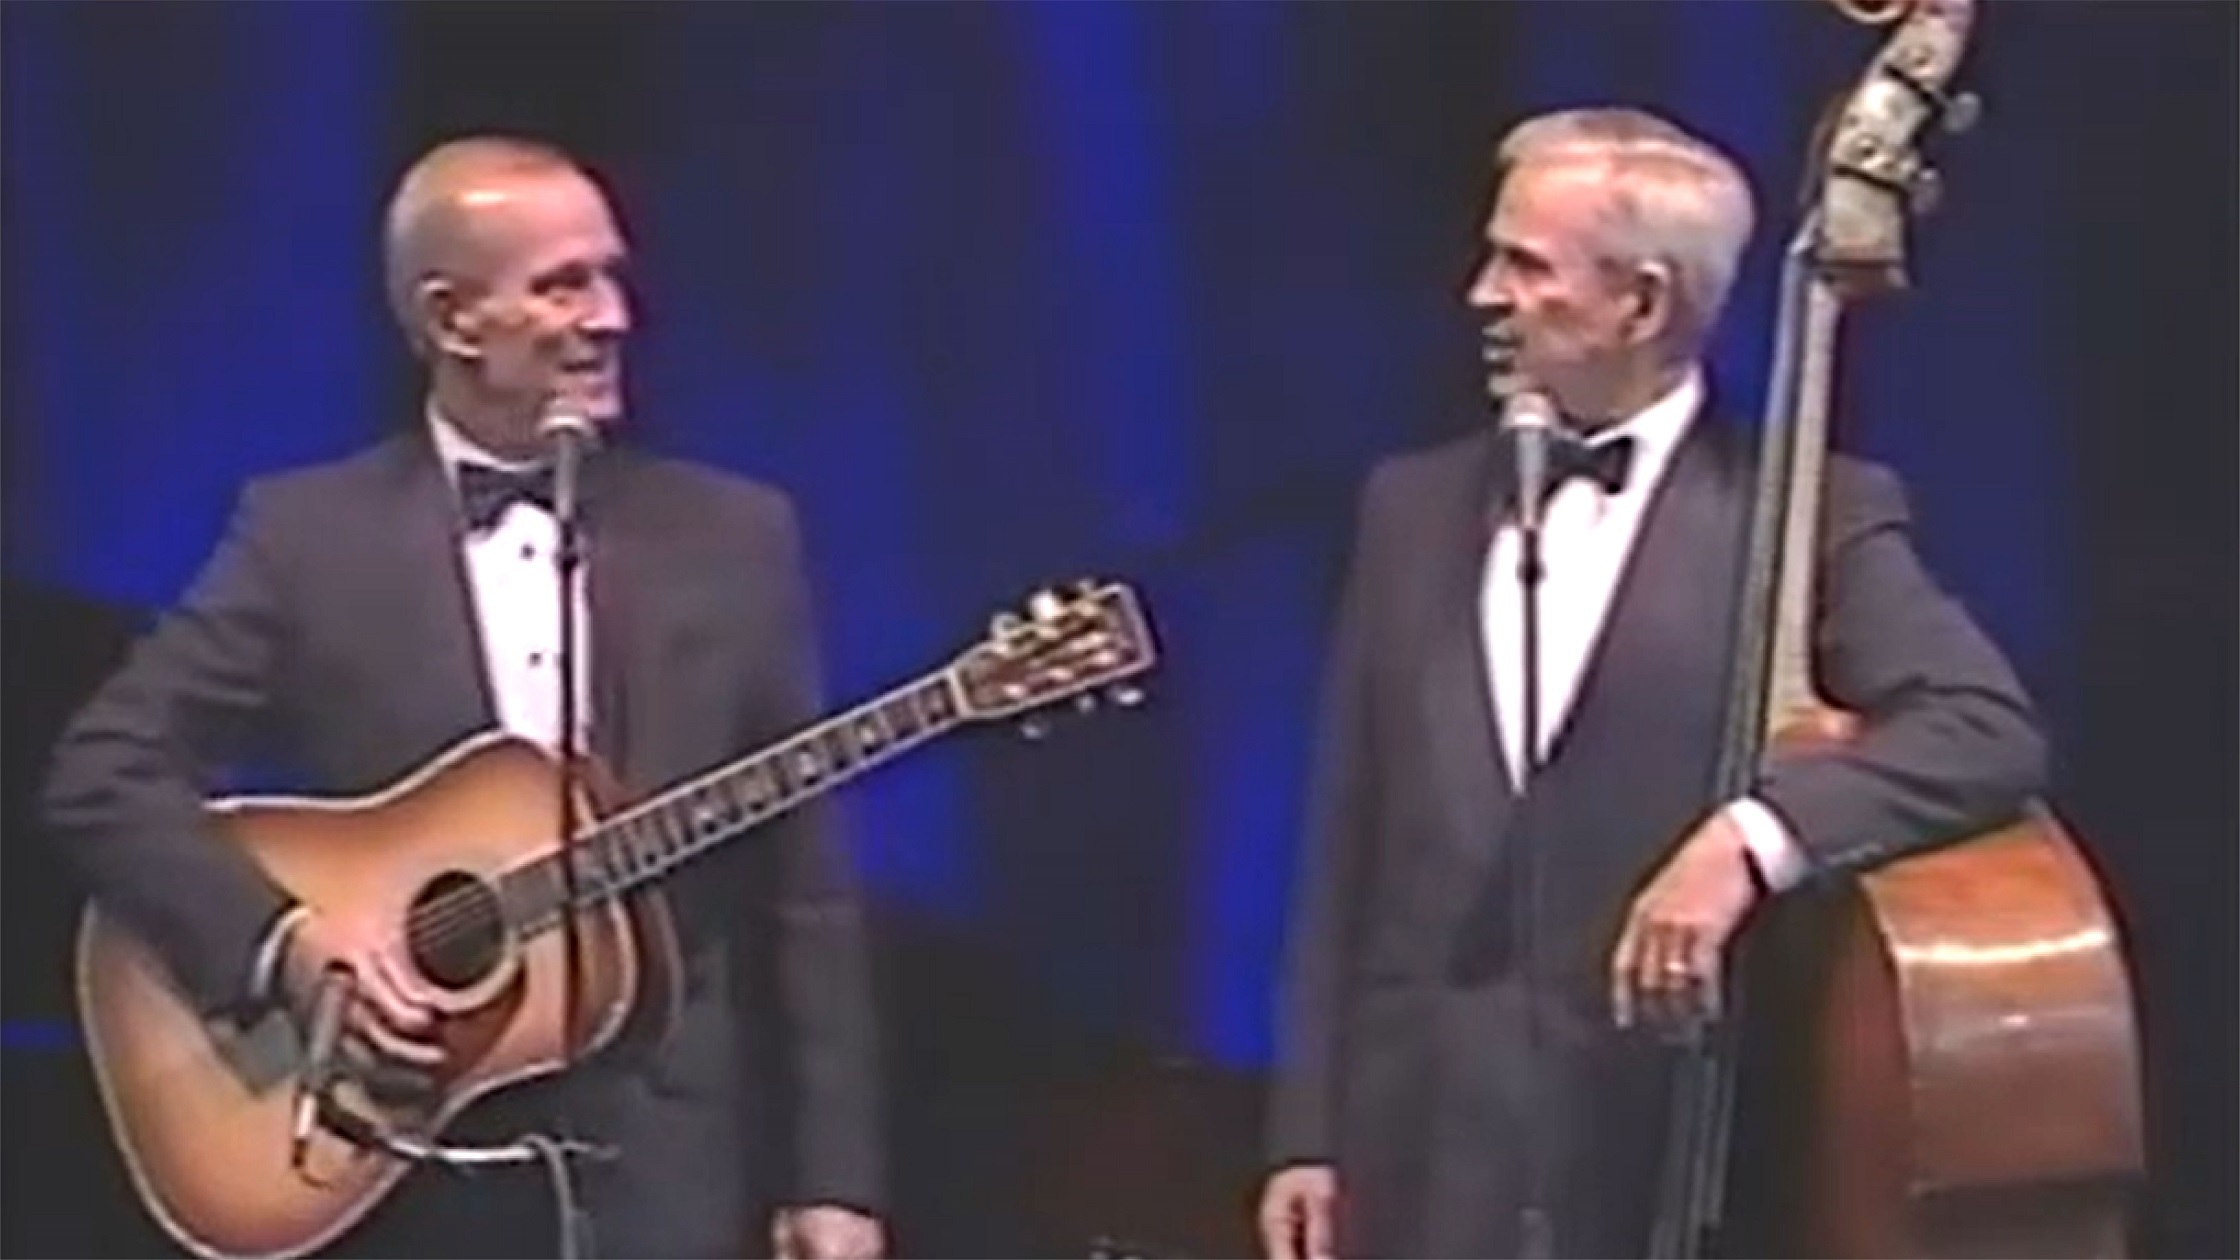 Smothers Brothers playing guita and performing on stage